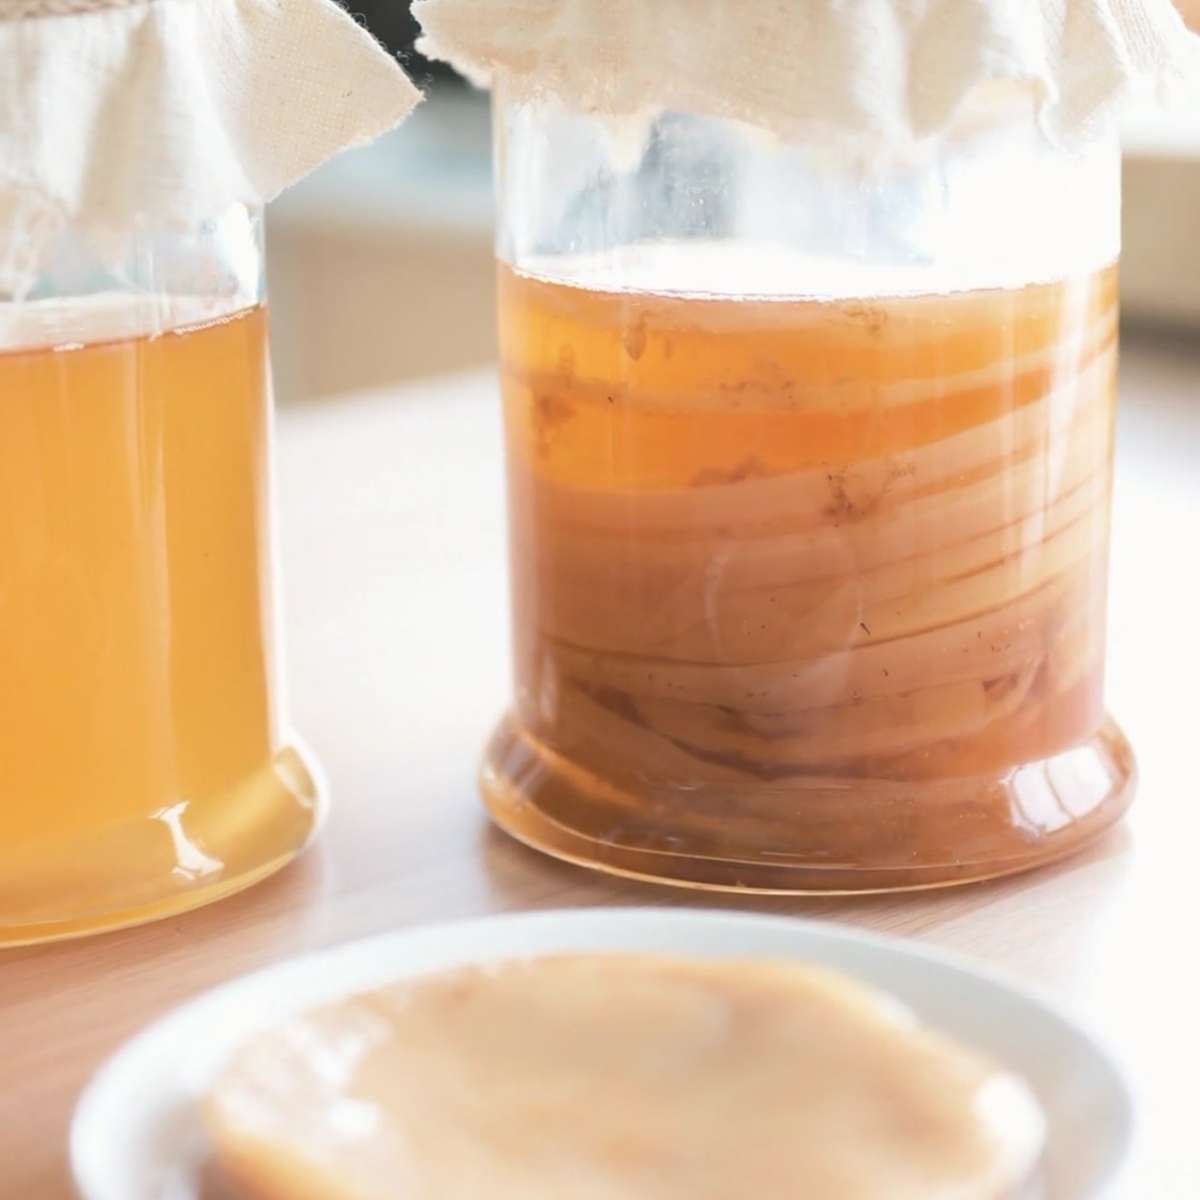 A large clear jar full of kombucha SCOBYs in a nice neat stack. A single scoby sits on a white plate in front of the full jar.